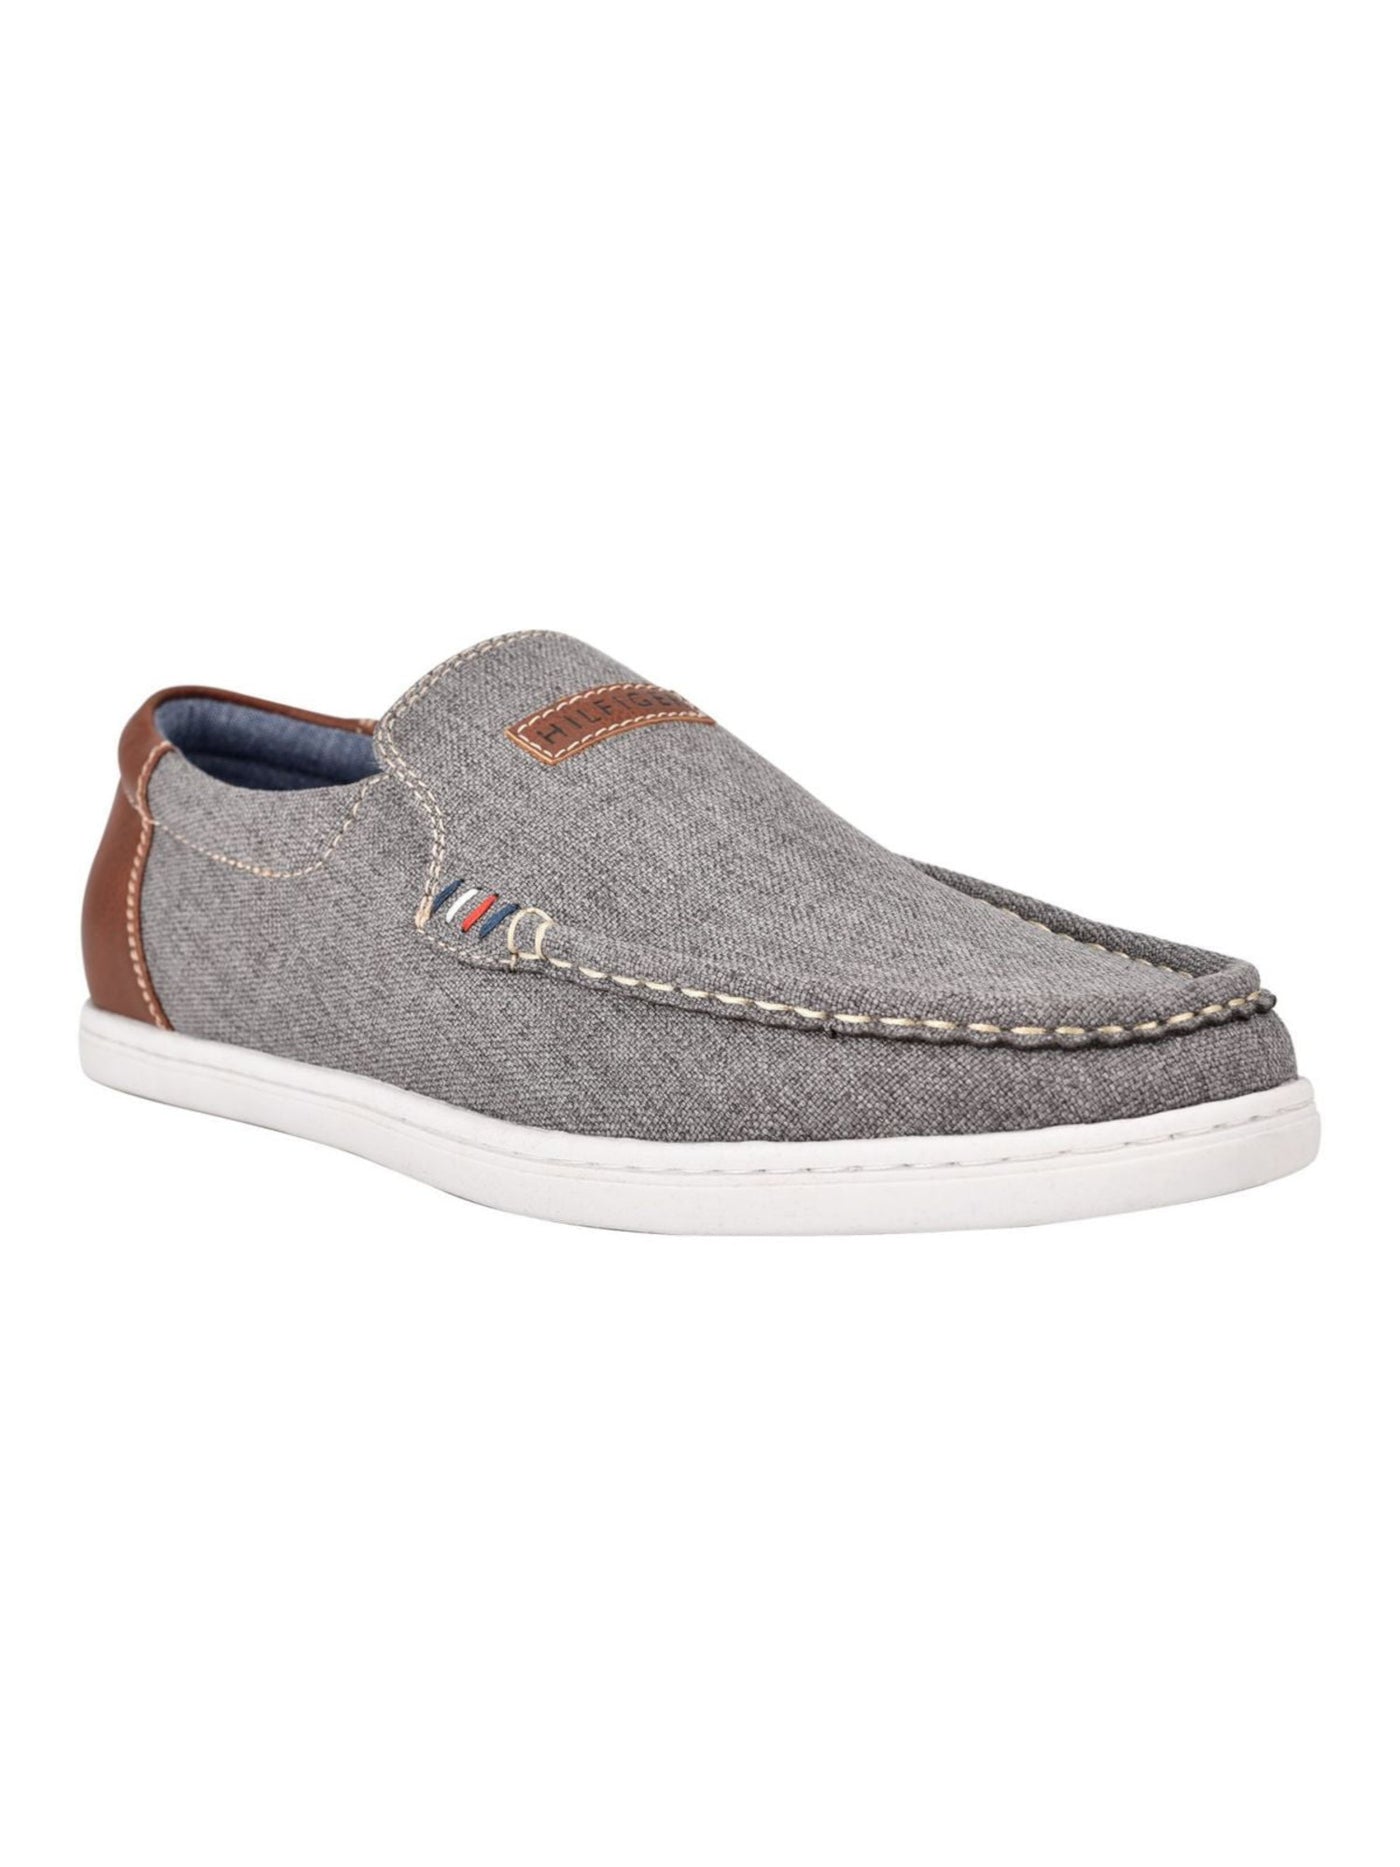 TOMMY HILFIGER Mens Gray Linen Cushioned Stretch Carlid Round Toe Slip On Sneakers Shoes 7 M